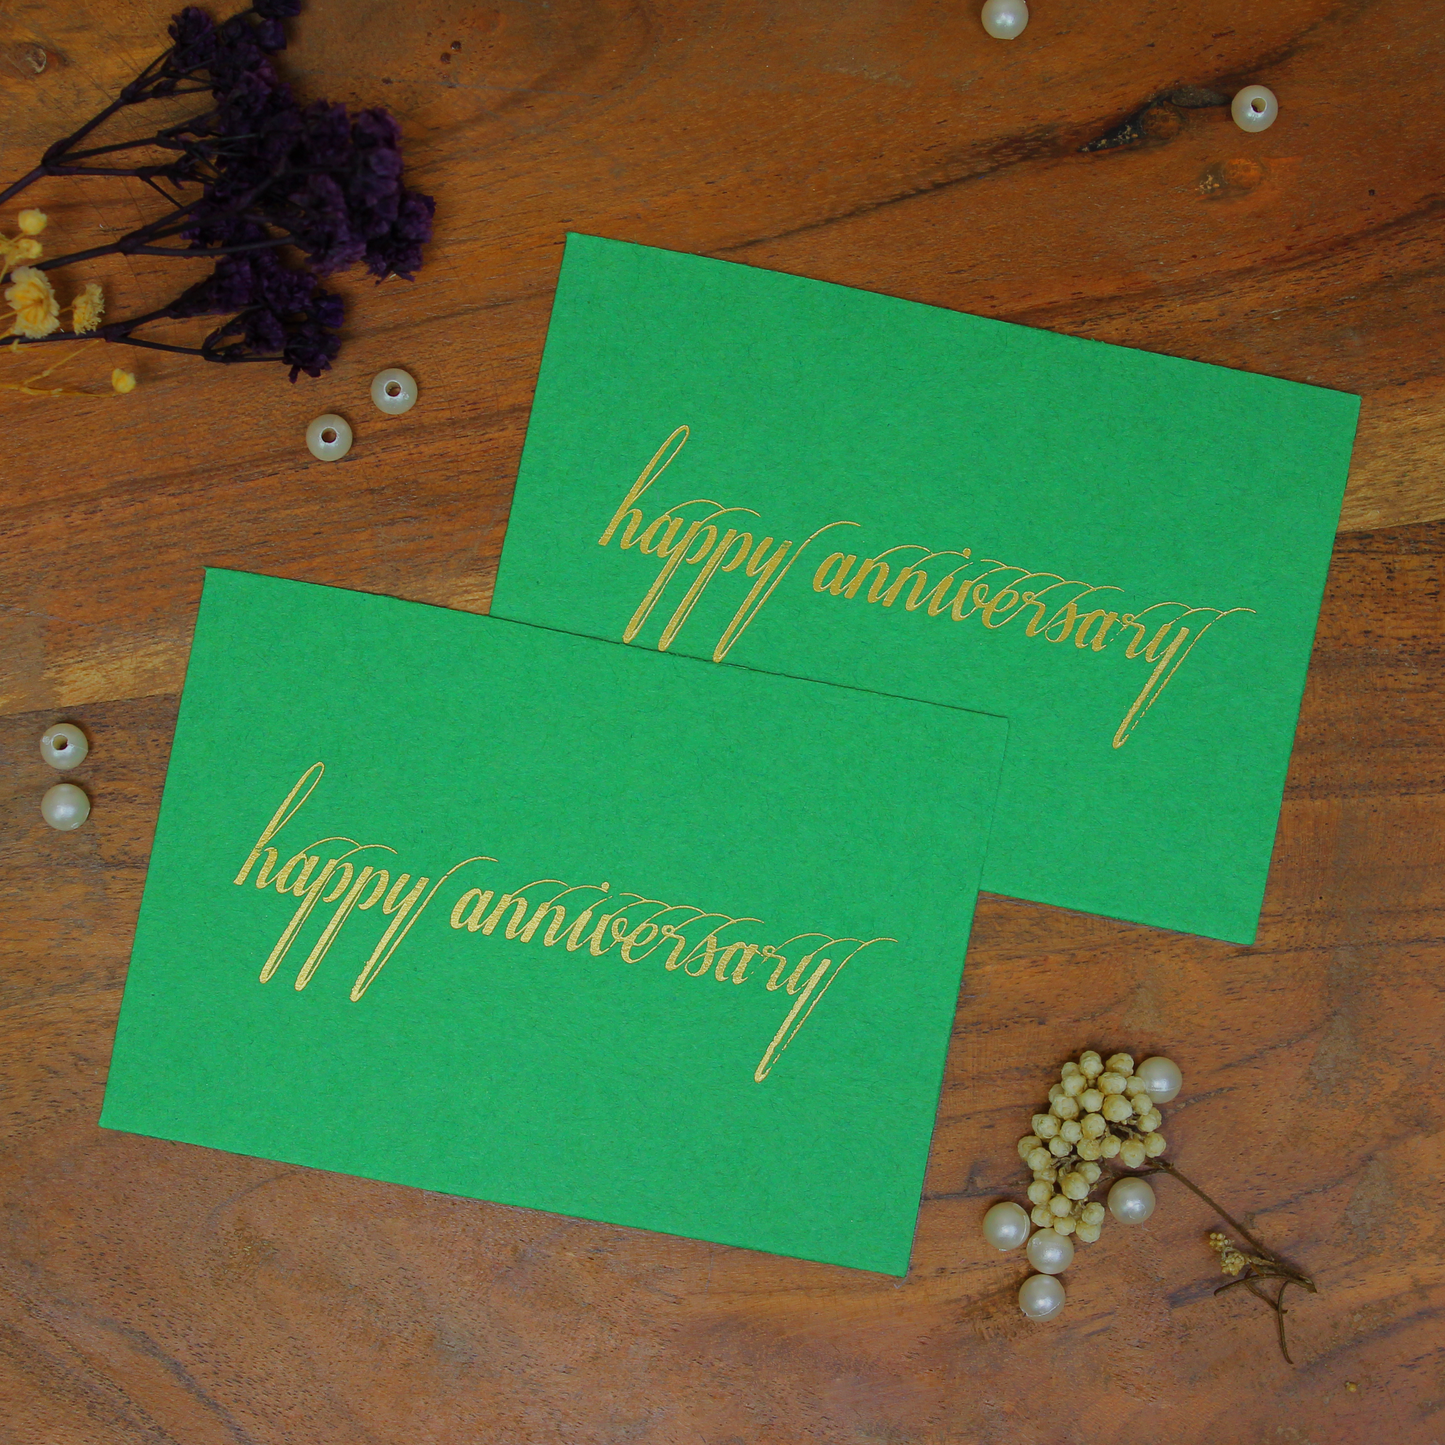 HAPPY ANNIVERSARY TAGS (4x2.75 INCHES)